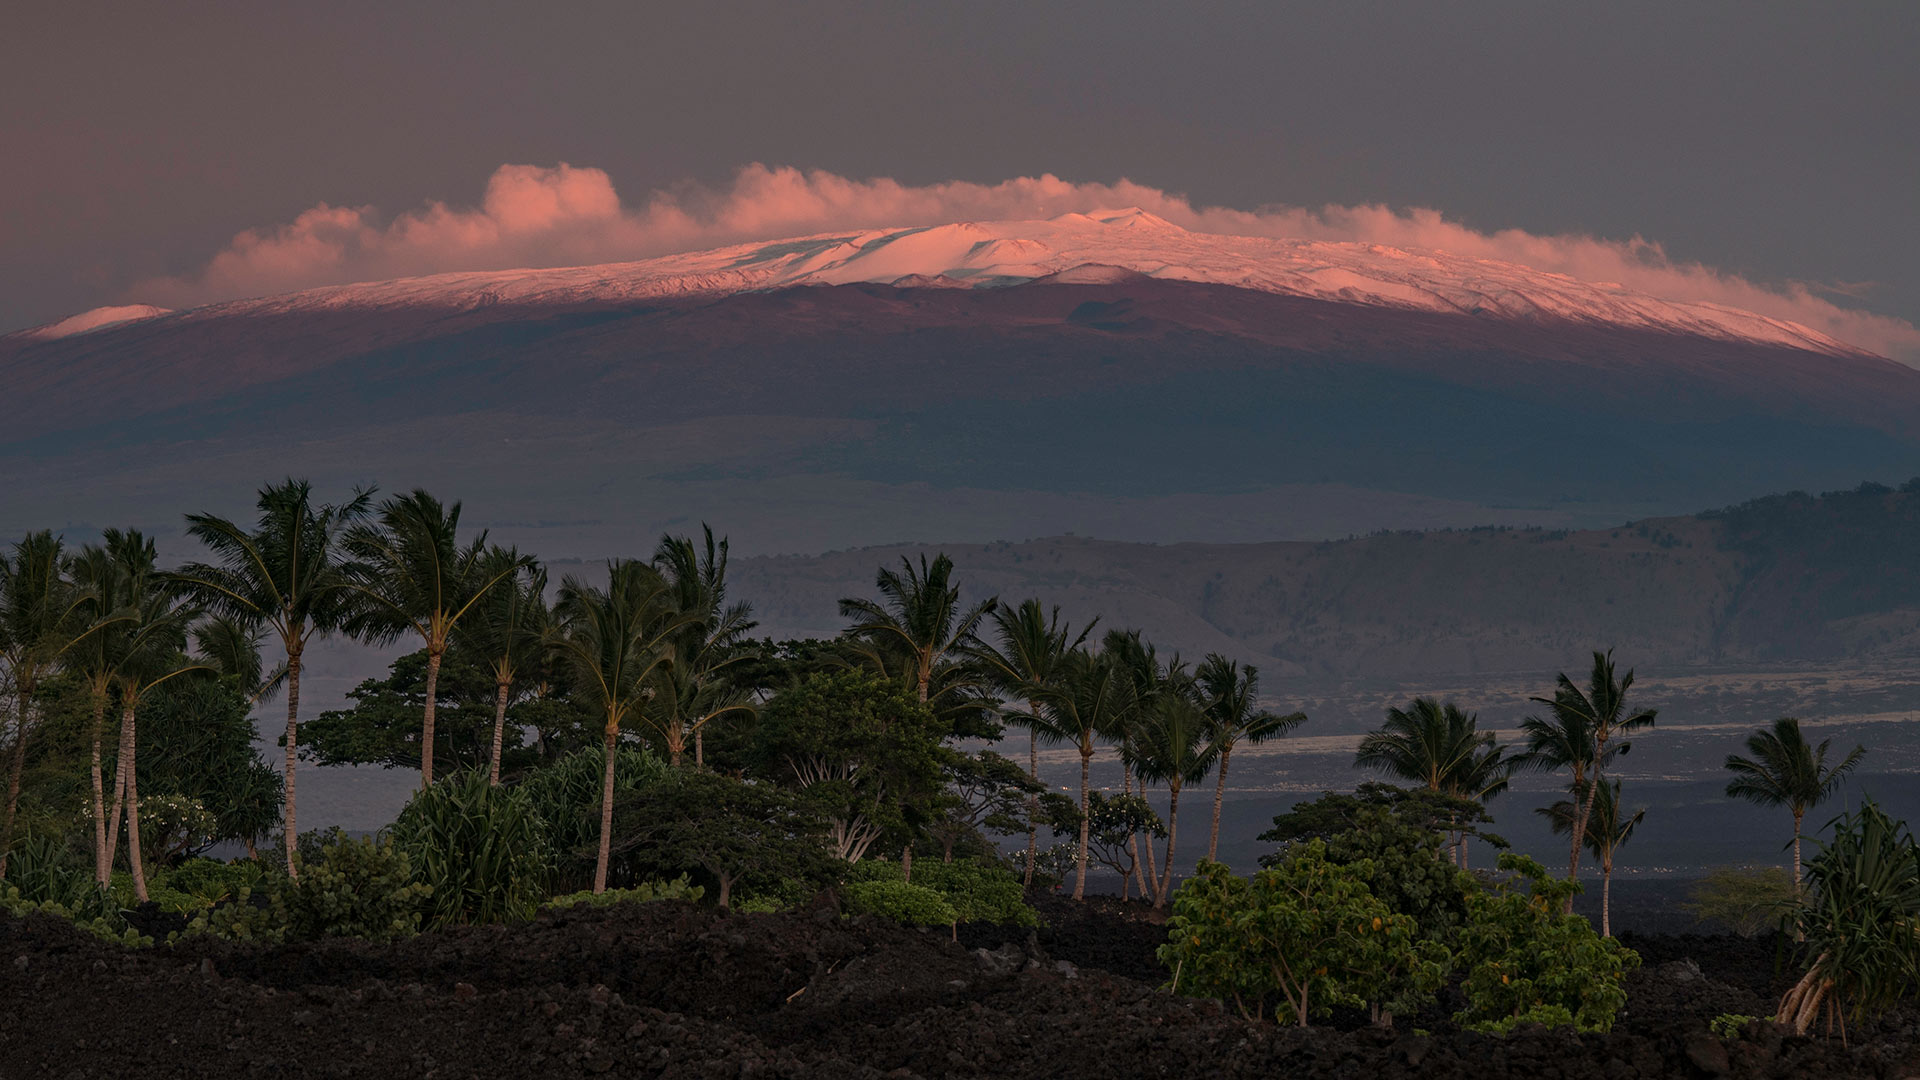 The sunset is reflected on snow-capped Mauna Kea